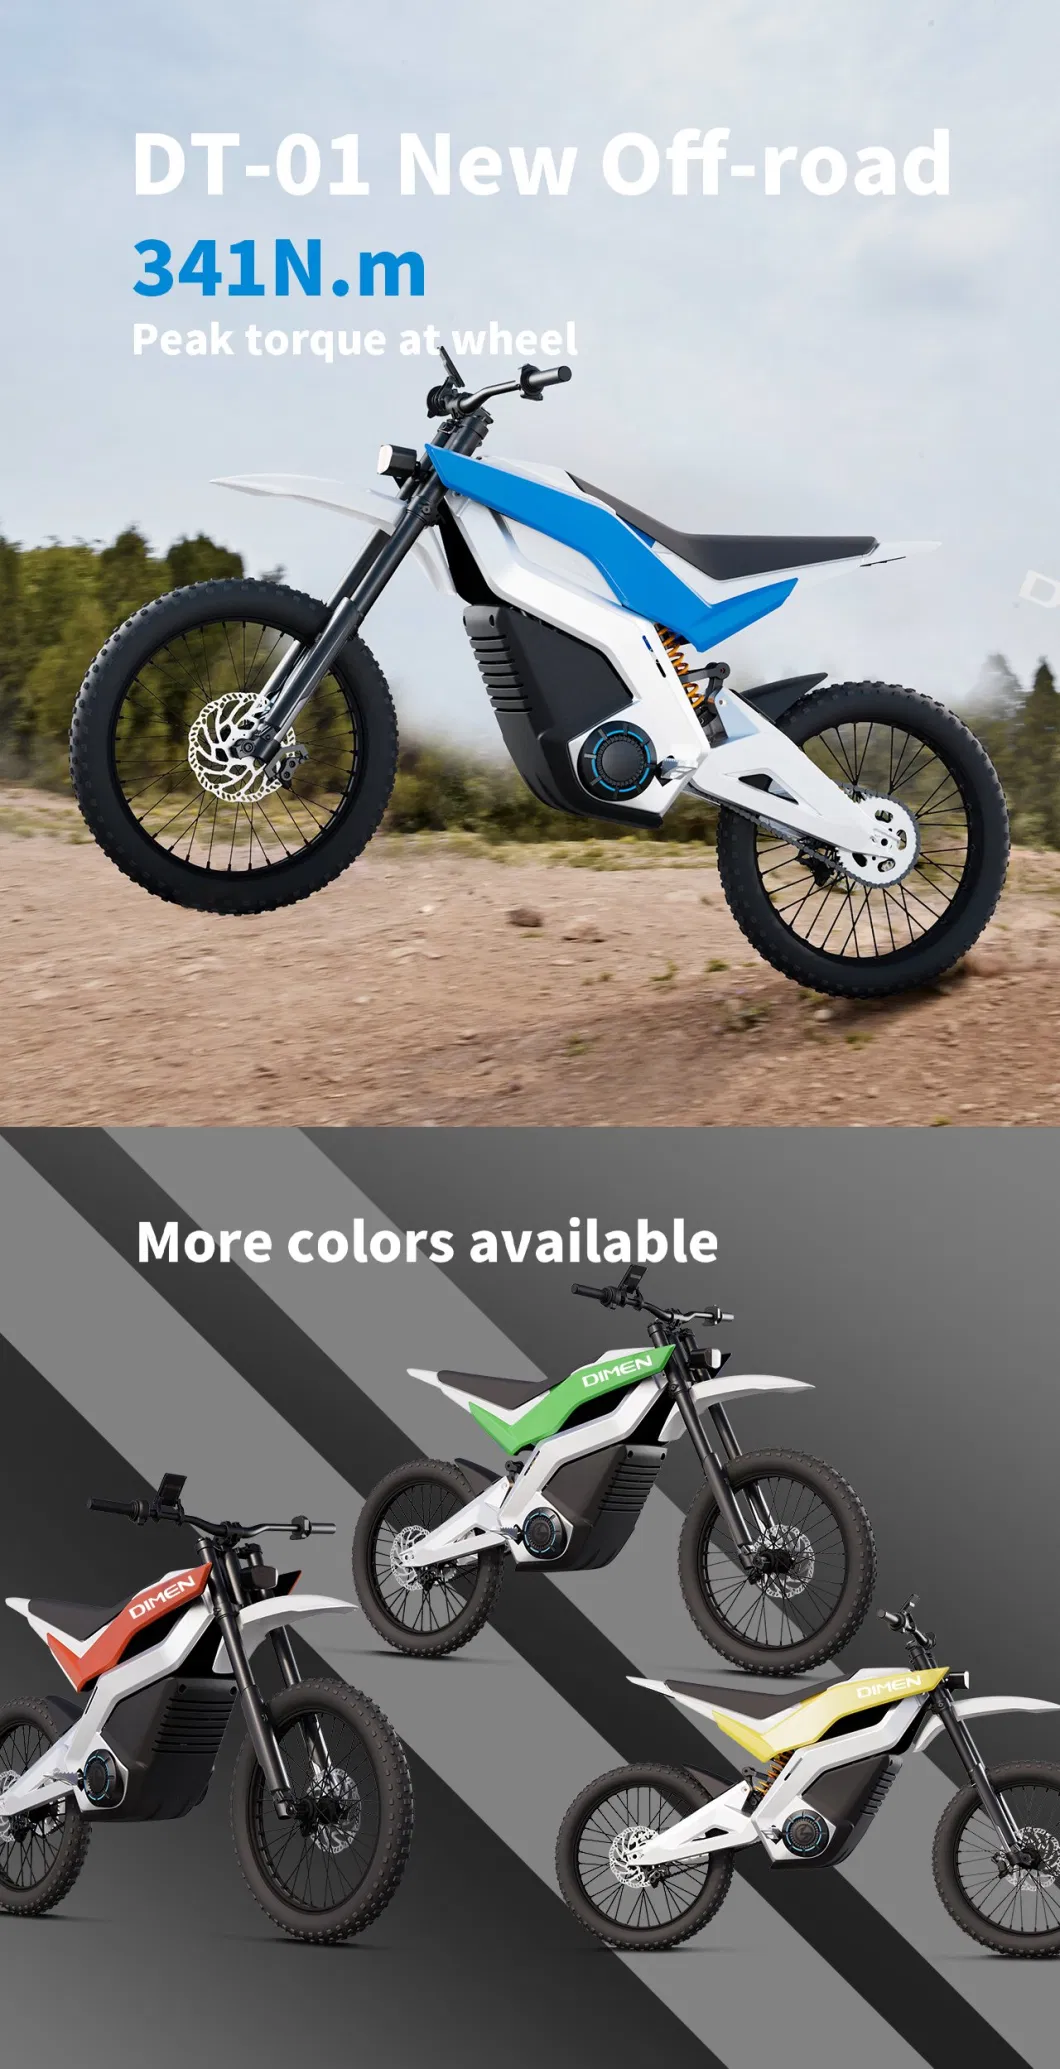 Electric Scooter Bicycle Electric Bike Scooter Motor Scooter Bike 72V 30ah Motor 3000W Battery Electric City Bike Electric Moped Dirt Bike